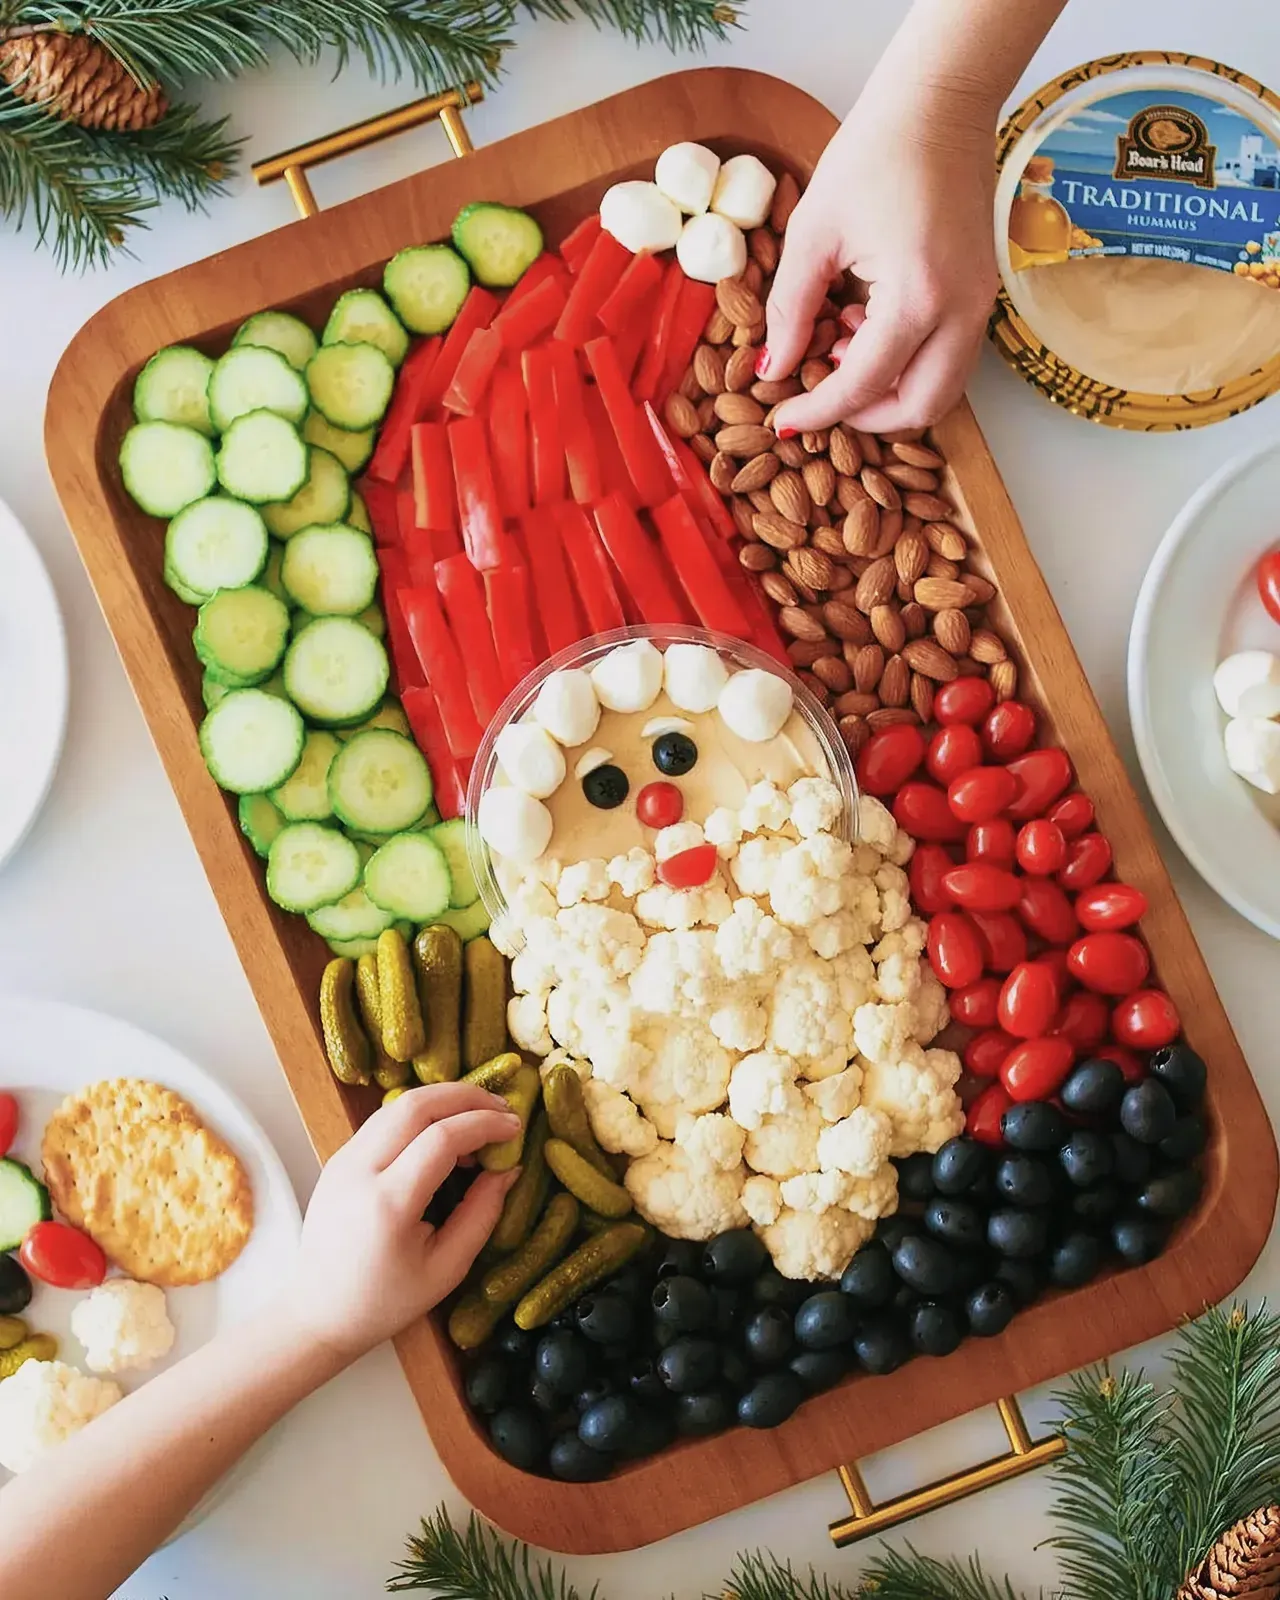 Santa-themed charcuterie board with fresh vegetables, fruits, hummus, and more.